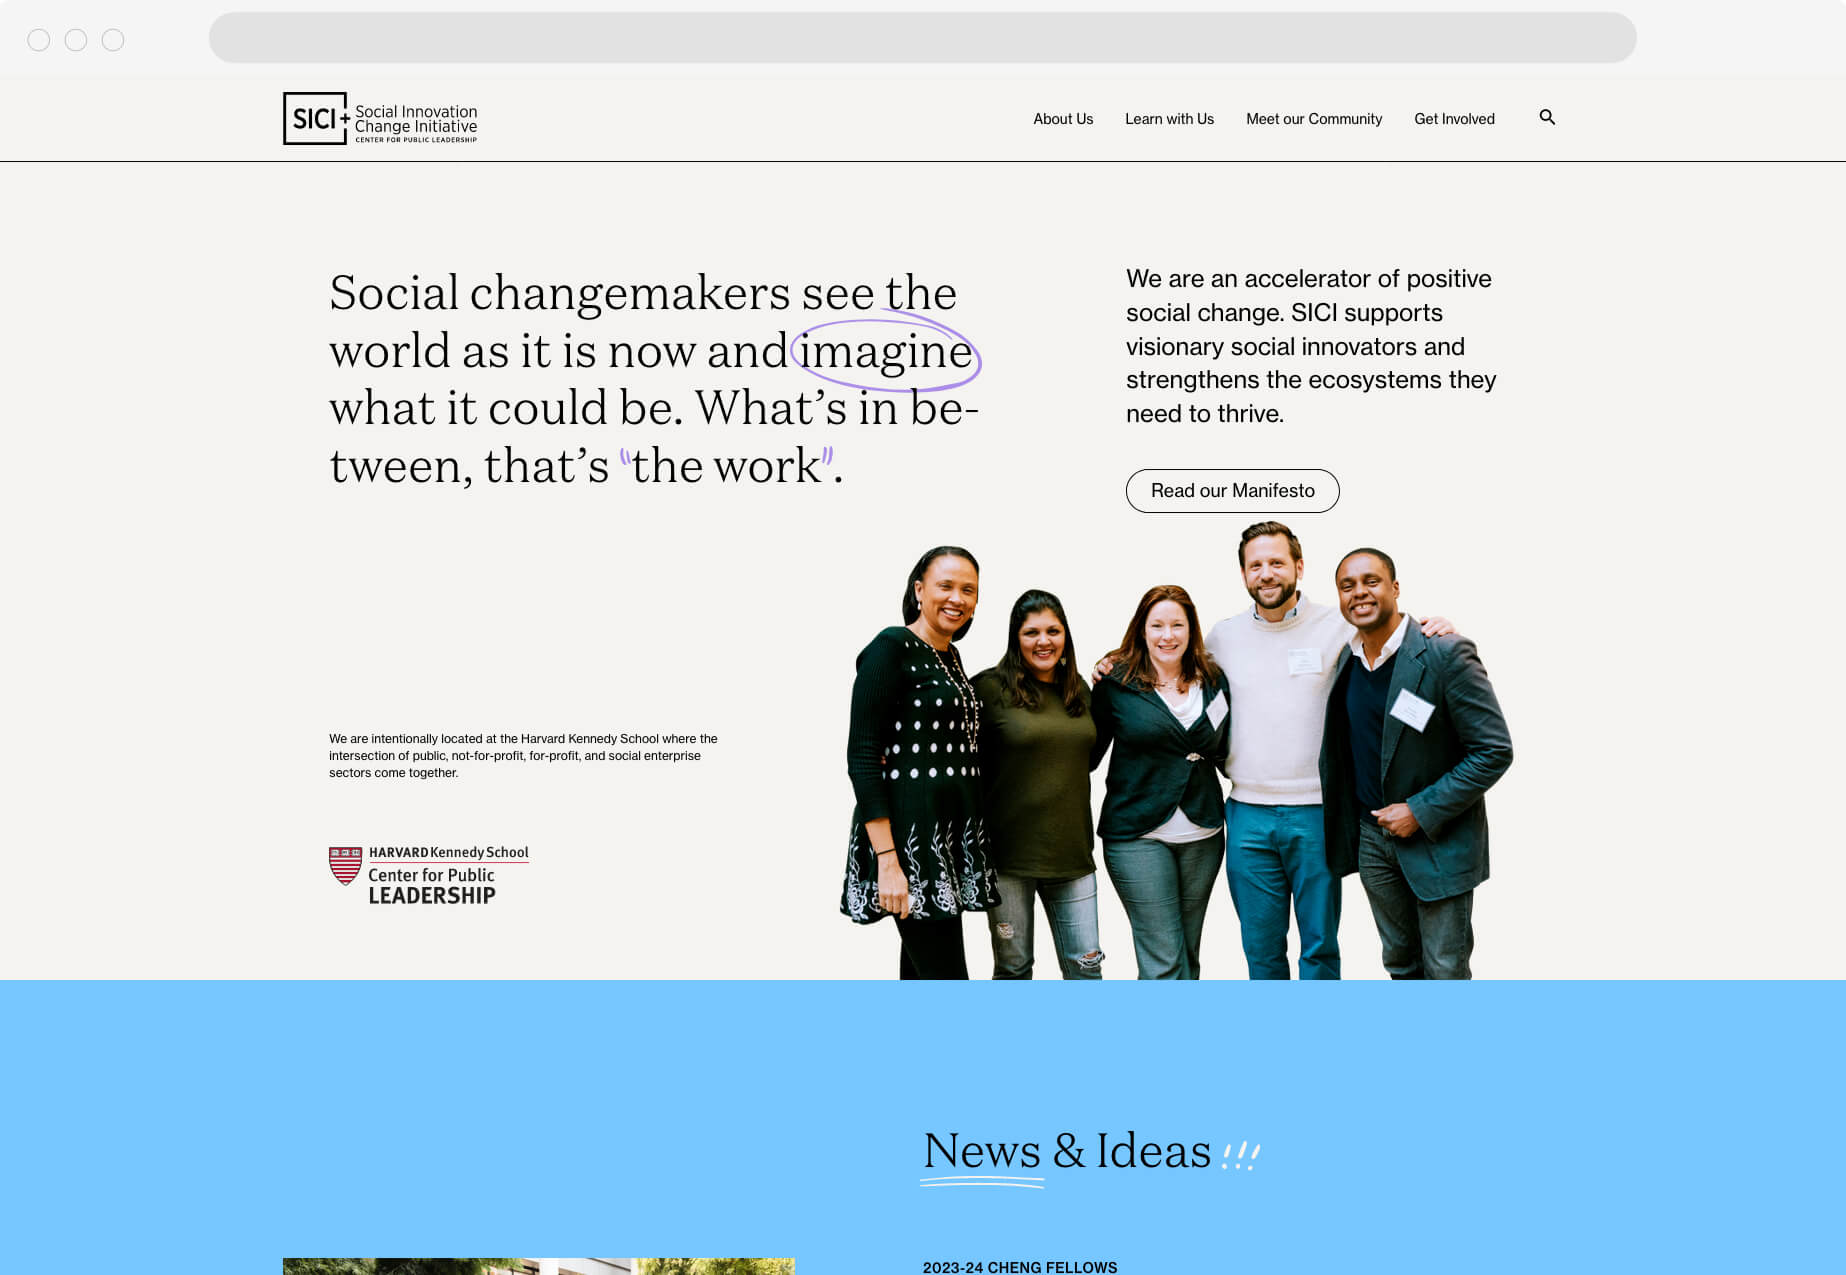 A homepage with the lead "Social changemakers see the world as it is now and imagine what it could be. What's in between, that's the work" above an image of 5 people smiling and standing next to each other. 